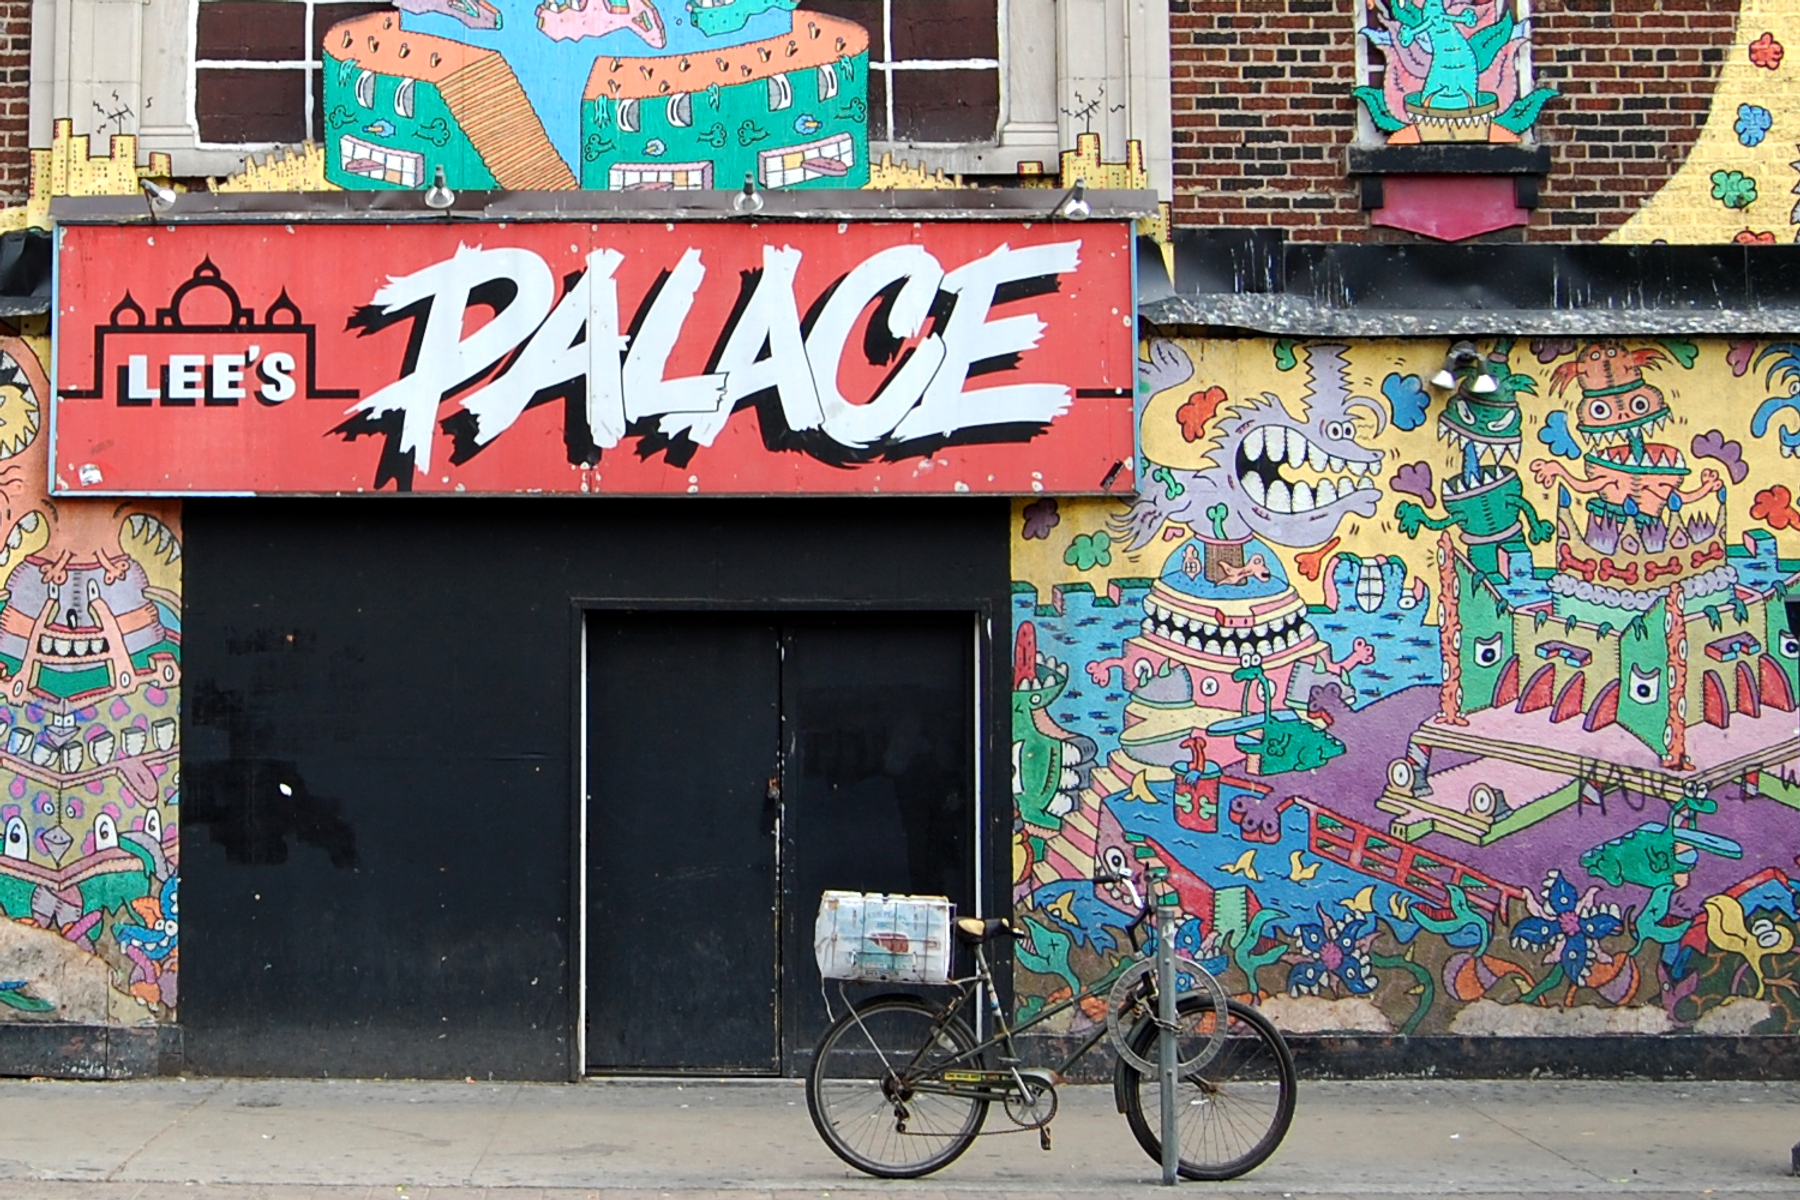 Red and white sign for Lee's Place in The Annex; colourful graffiti on walls and bicycle chained to parking meter.